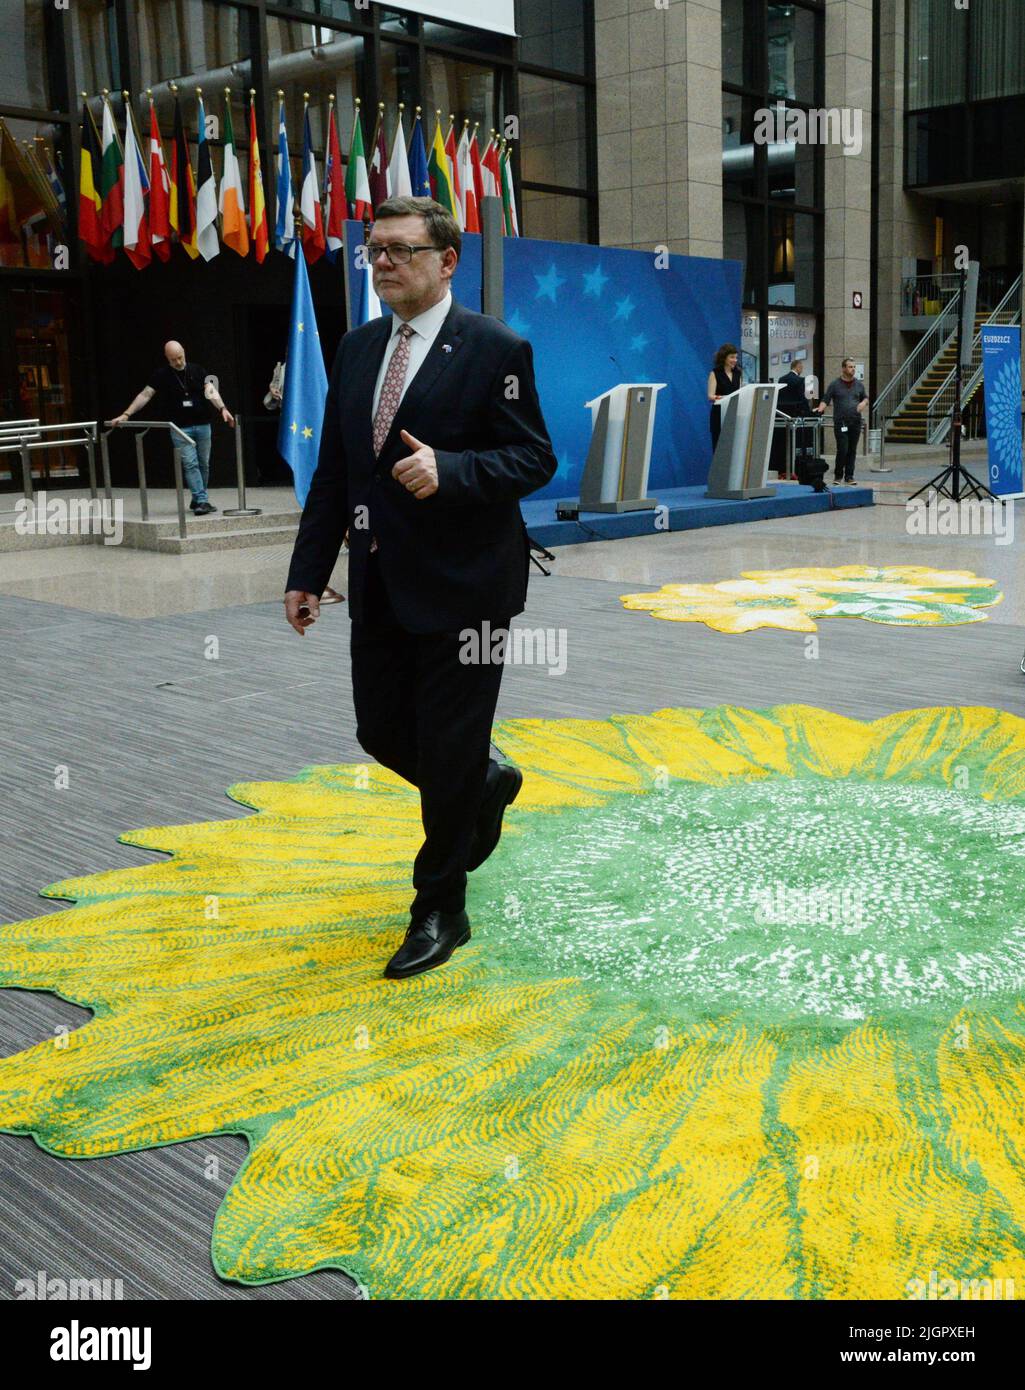 Brussels, Belgium. 12th July, 2022. Czech Republic's Finance Minister Zbynek Stanjura walks in the hall of the Justus Lipsius building in Brussels, Belgium, which was decorated with twelve carpets with floral motifs by Czech artists on the occasion of the Czech EU Presidency, July 12, 2022. Credit: Petr Kupec/CTK Photo/Alamy Live News Stock Photo